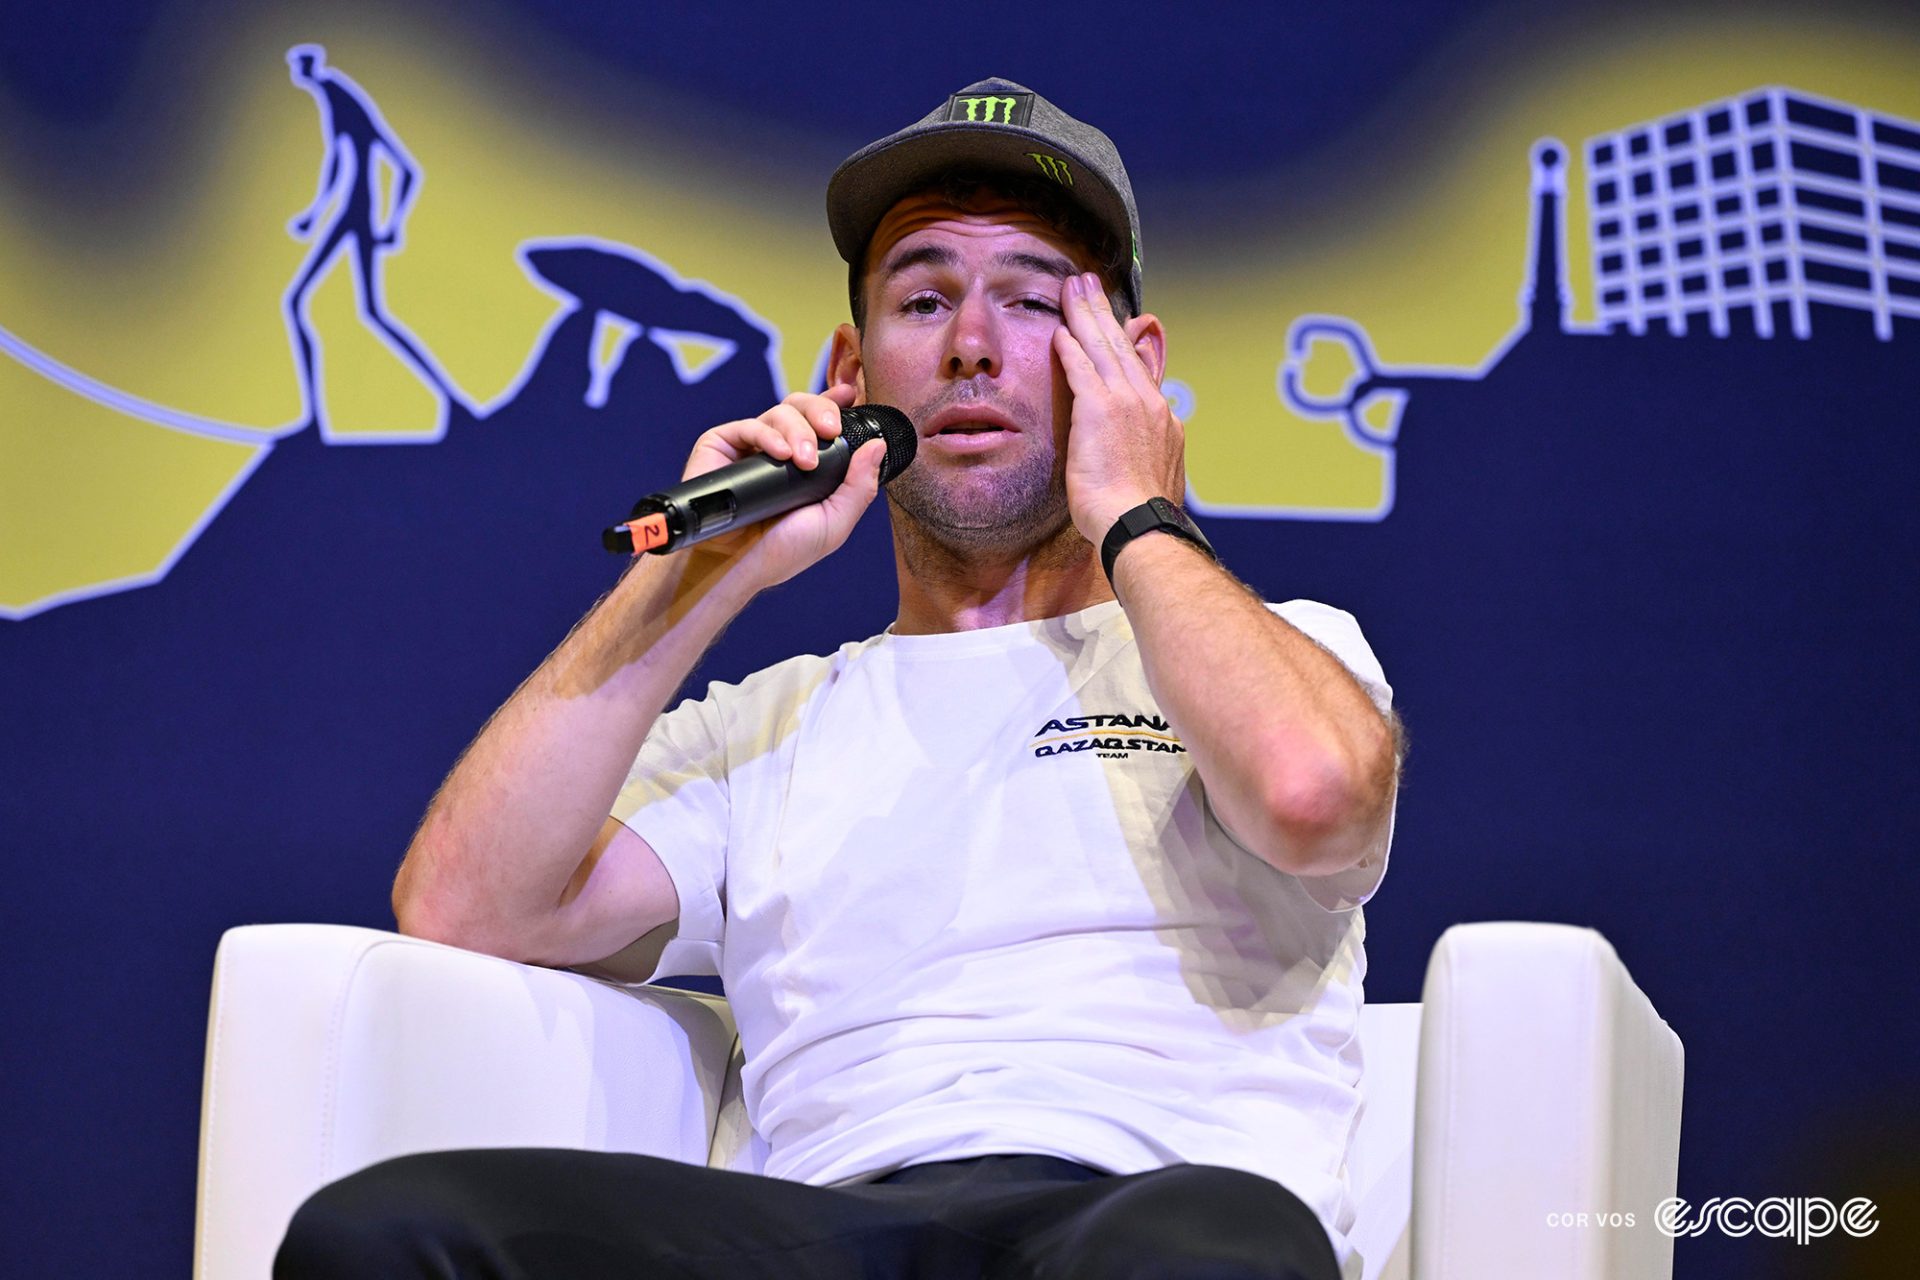 Mark Cavendish speaking into a microphone.